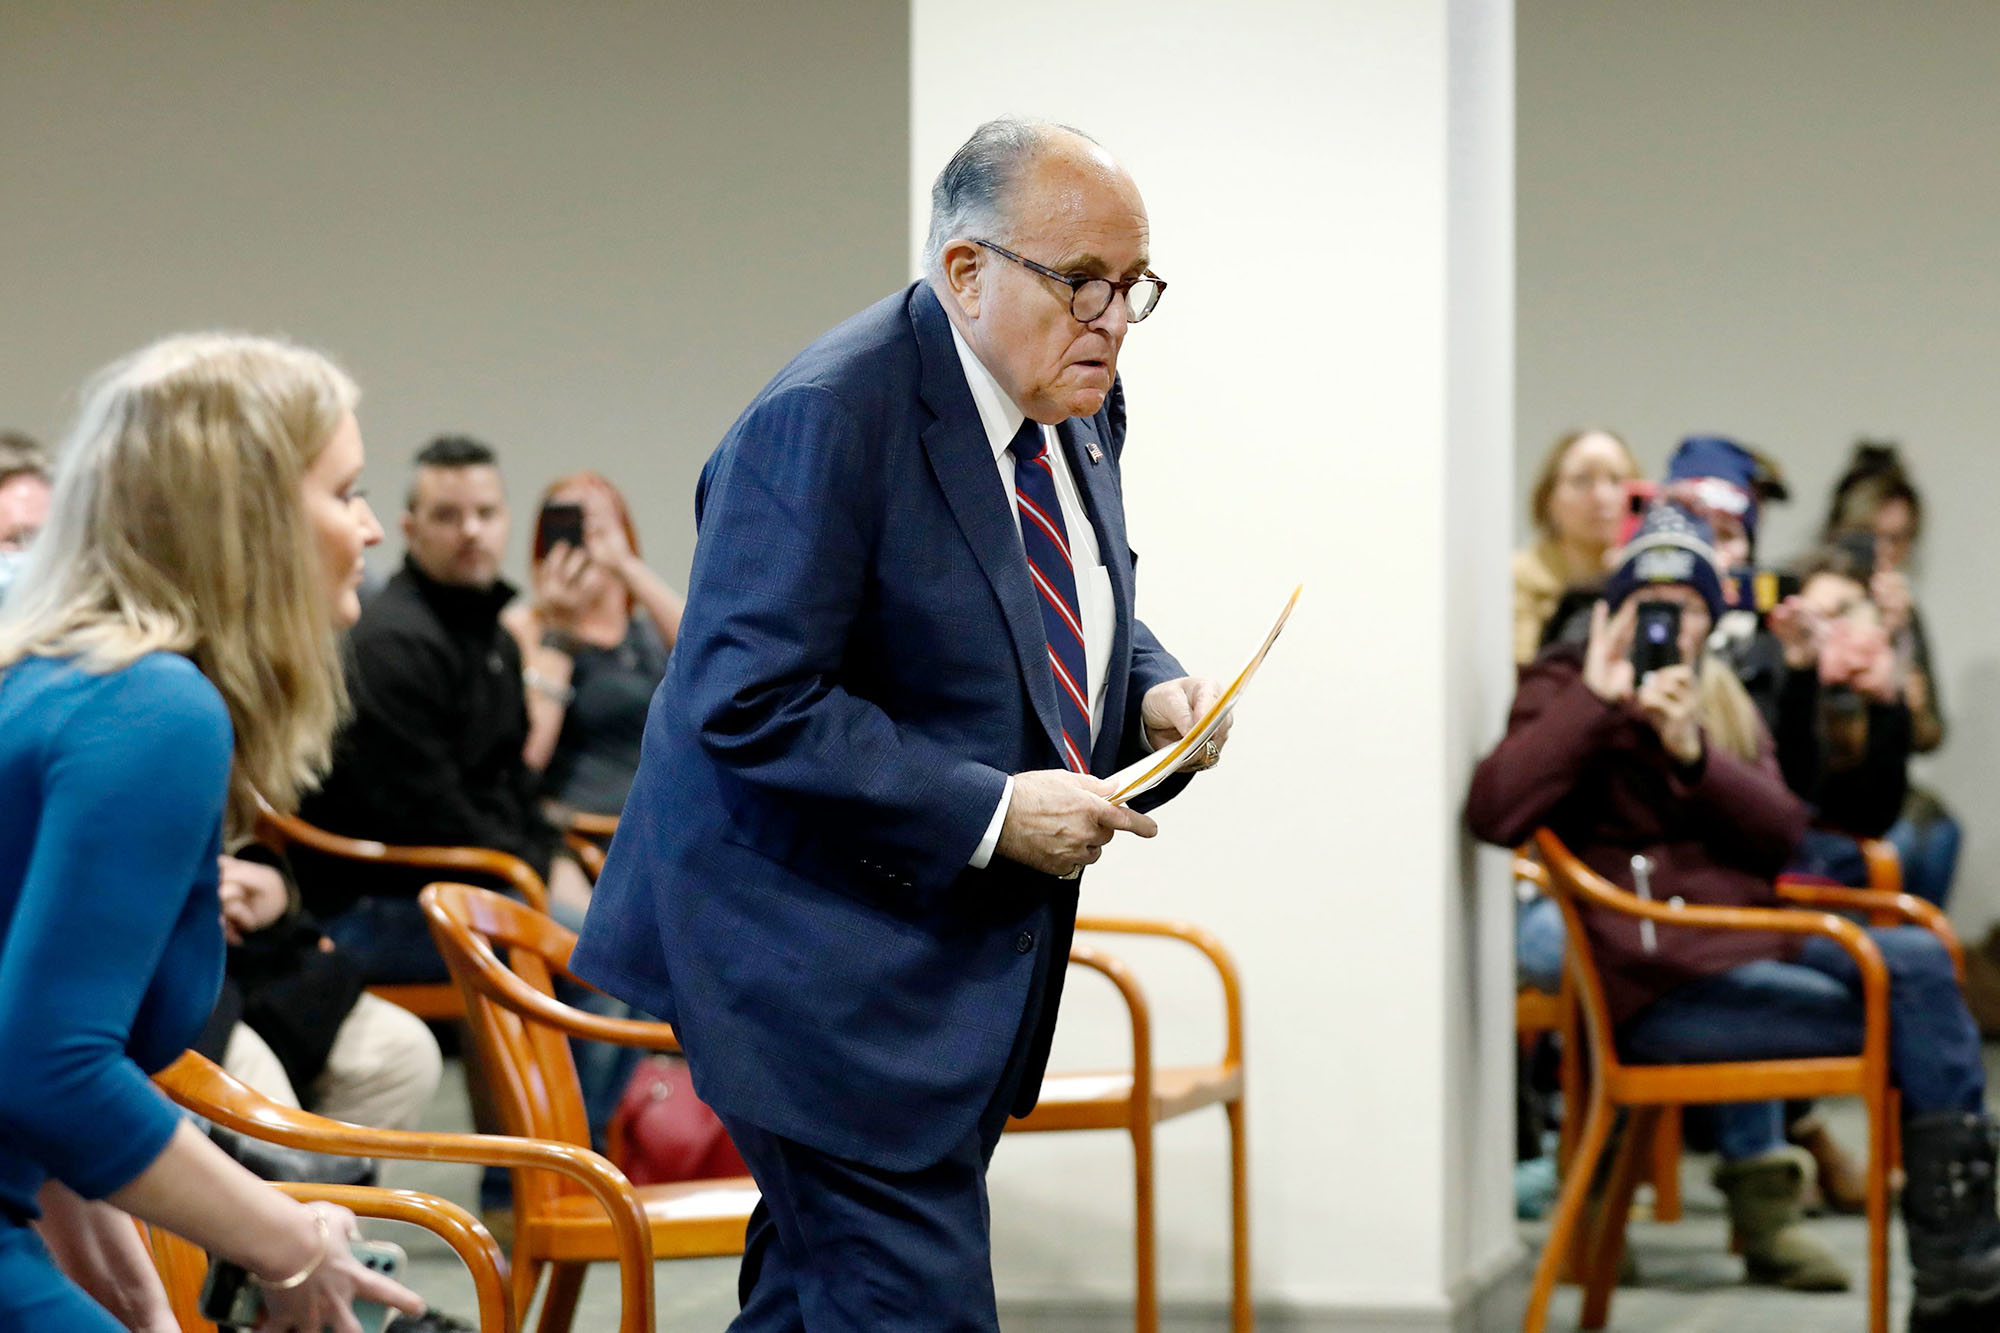 PHOTO: Rudy Giuliani, personal lawyer of President Donald Trump, walks to take his seat during an appearance before the Michigan House Oversight Committee in Lansing, Mich., Dec. 2, 2020. 